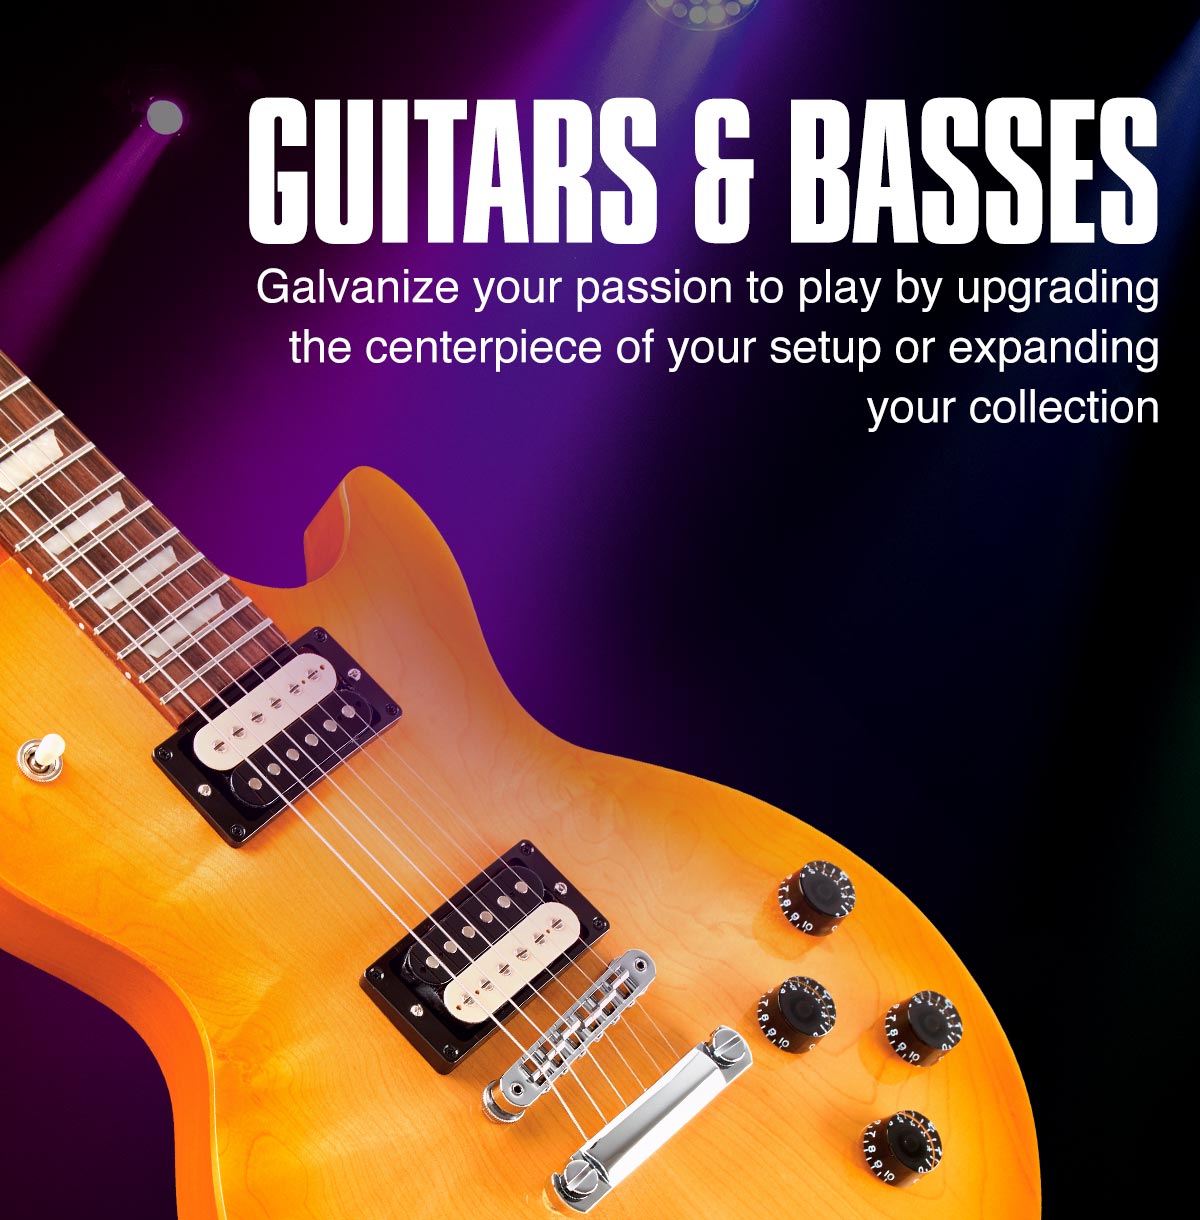 Guitars and basses. Galvanize your passion to play by upgrading the centerpiece of your setup or expanding your collection.